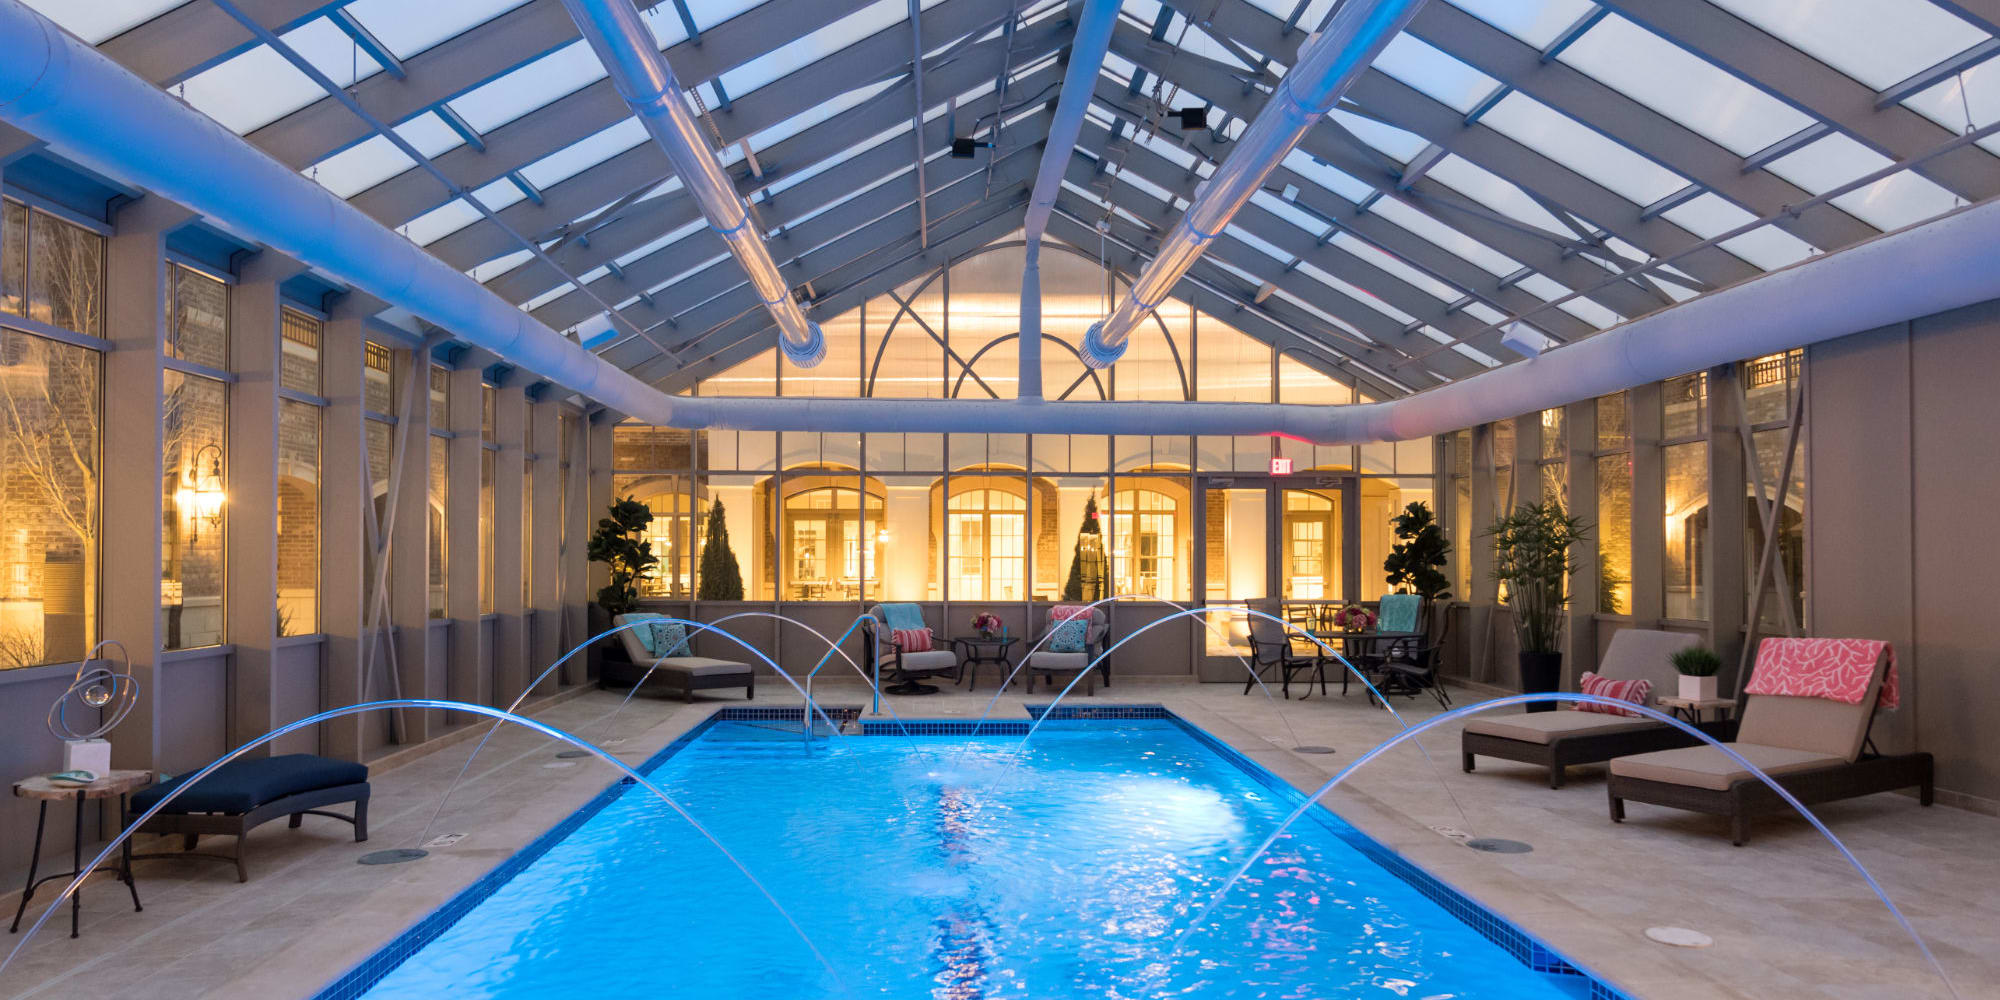 Indoor pool at Blossom Ridge in Oakland Charter Township, Michigan